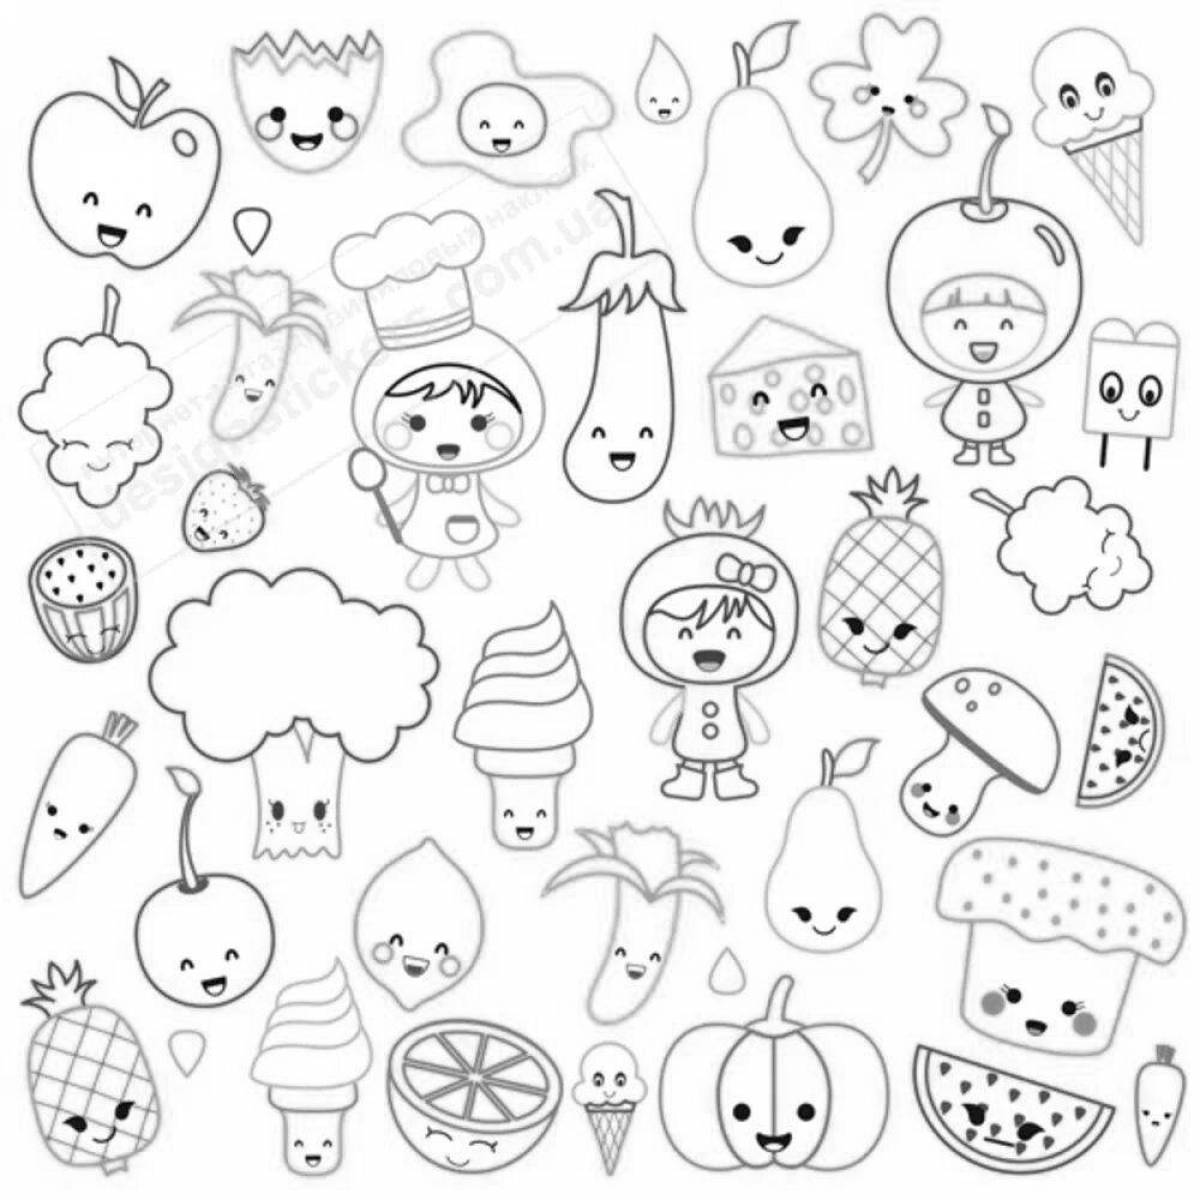 Great coloring cute stickers